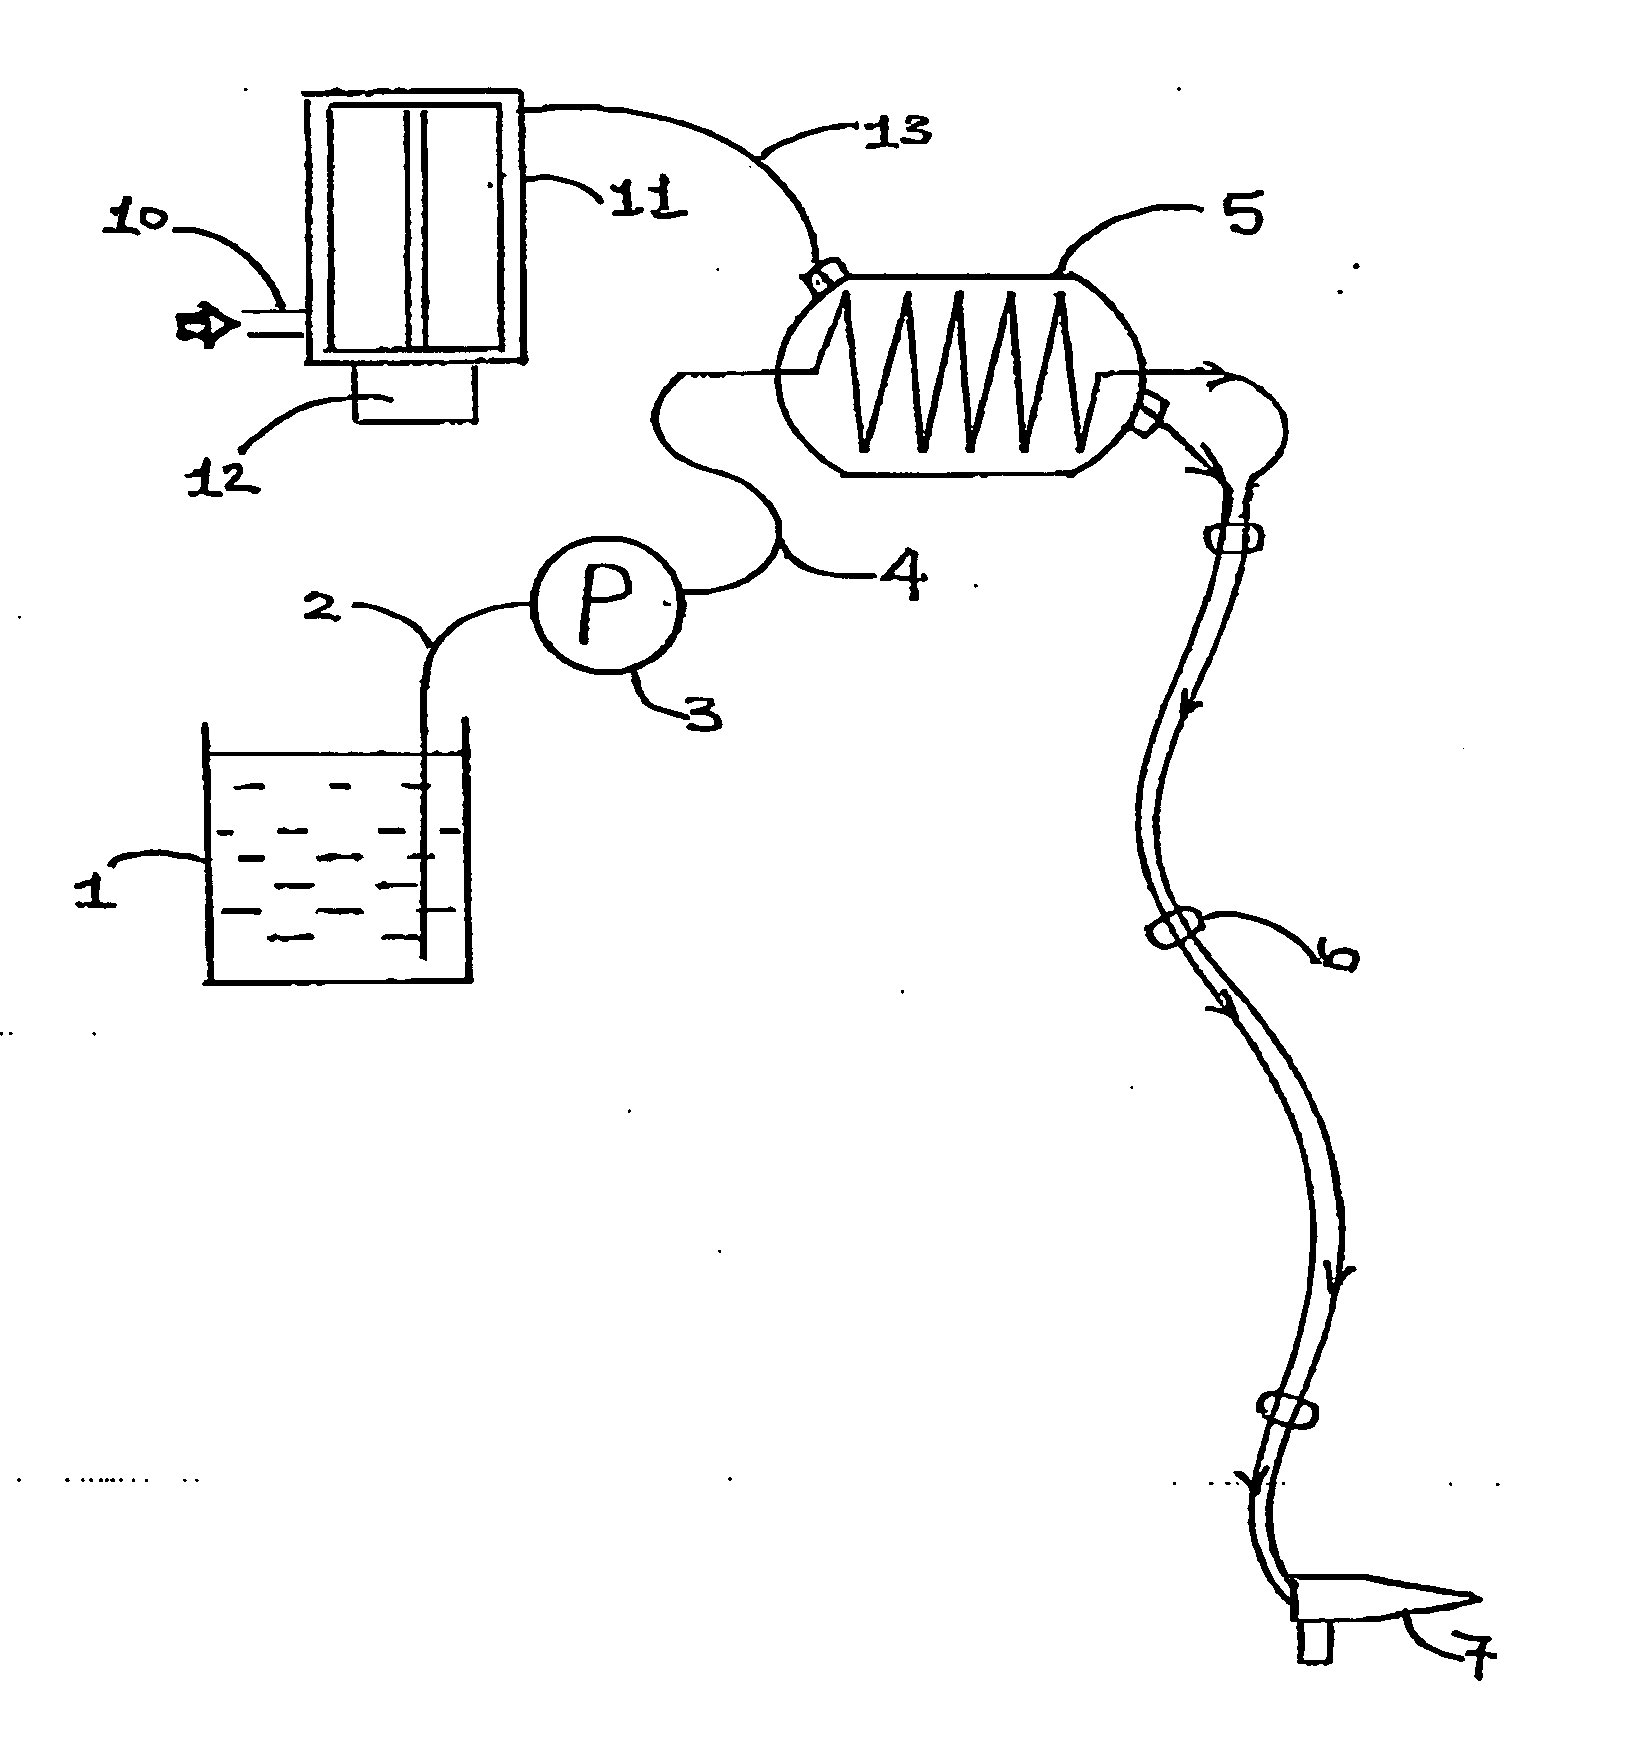 Paint composition and paint spraying apparatus with preheated paint